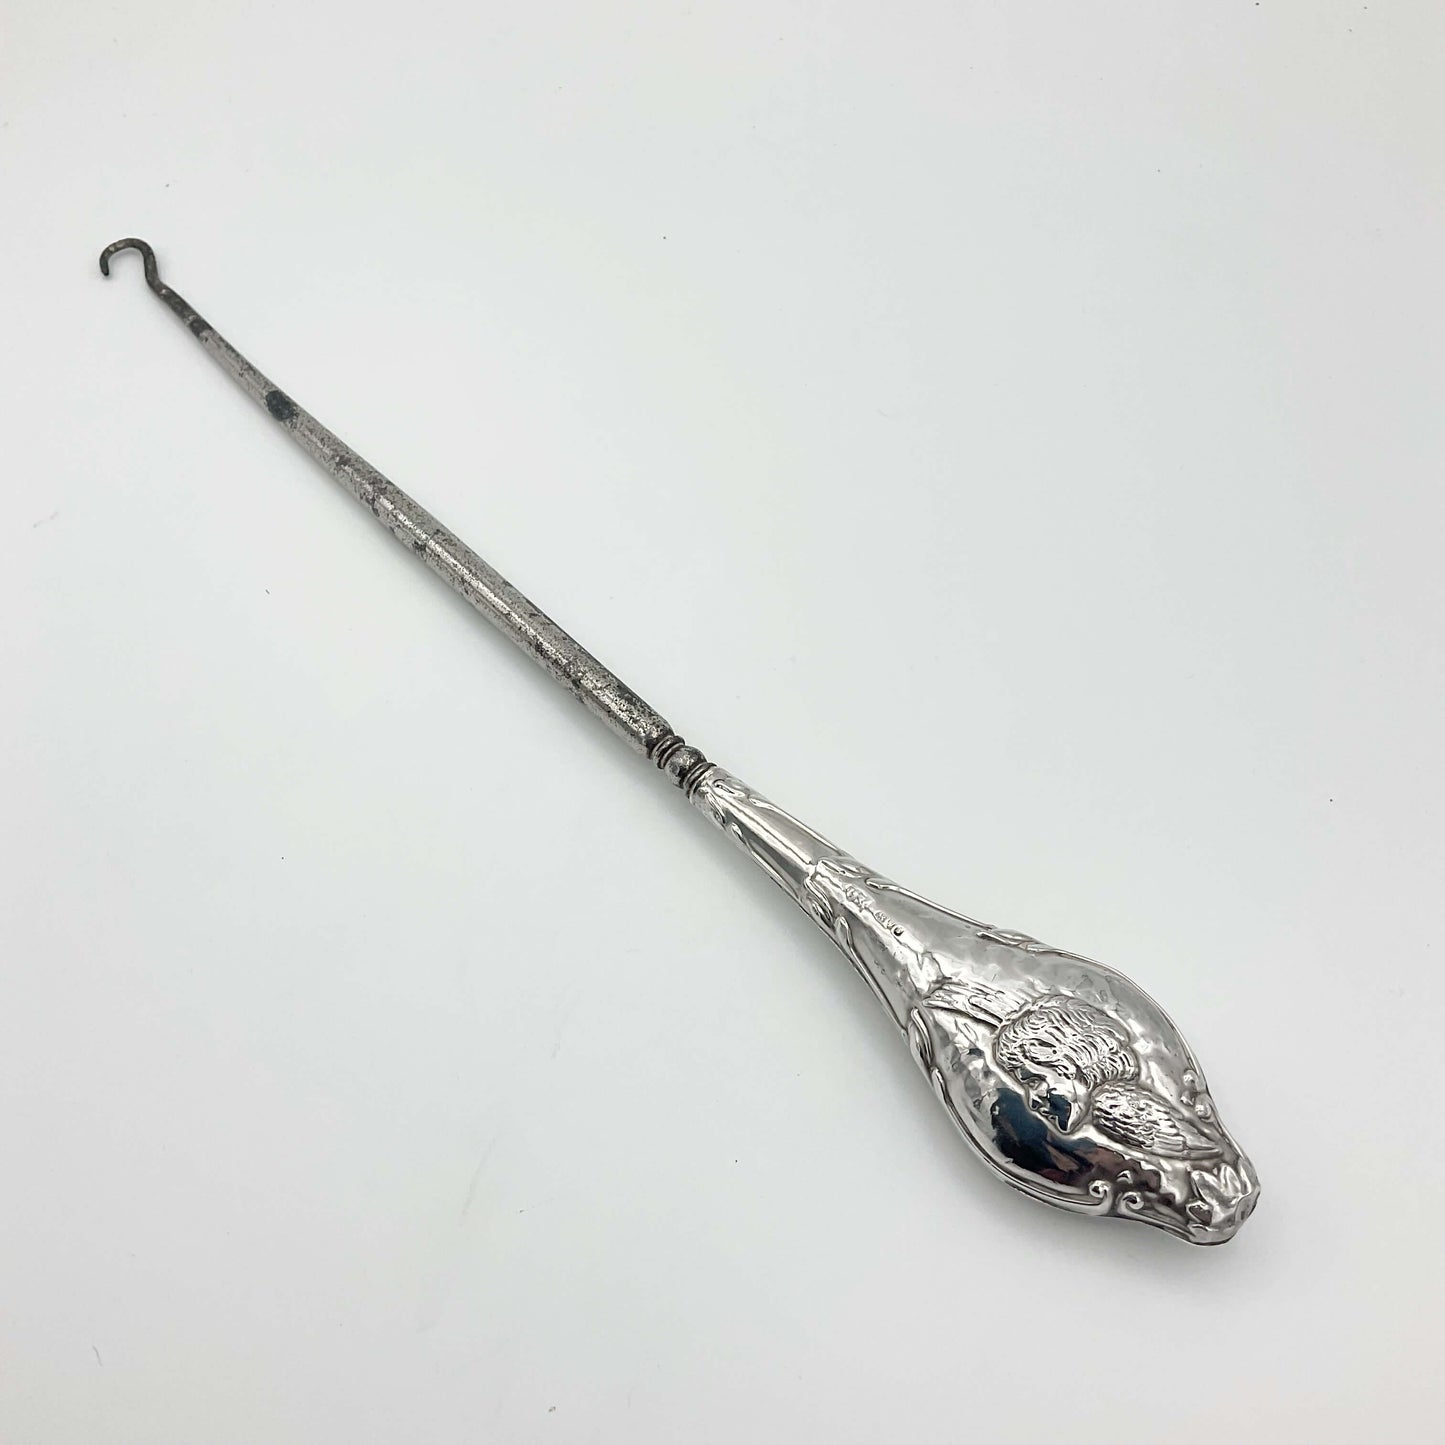 Beautiful large antique silver button hook featuring a cherub on the handle